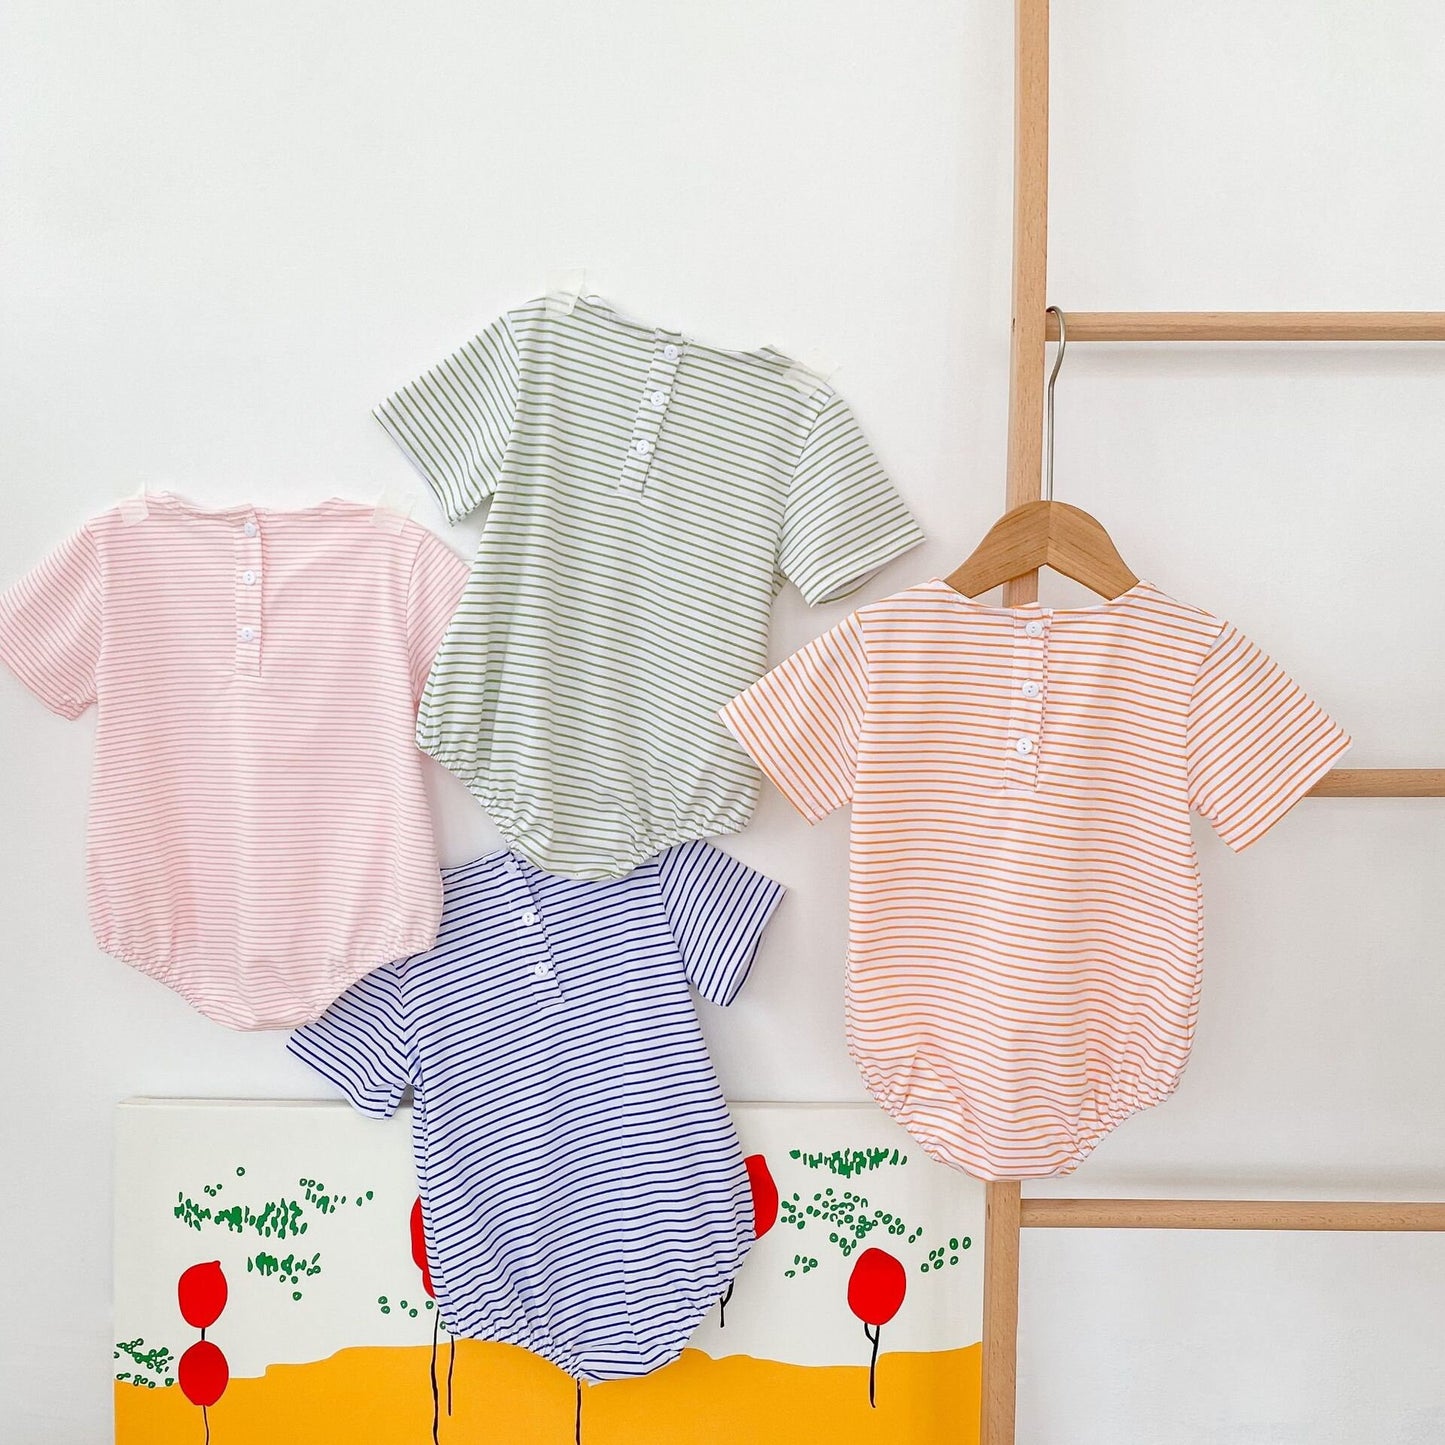 Cute oversized, bubble striped baby romper for summer/spring. Unisex, gender neutral perfect baby shower gift